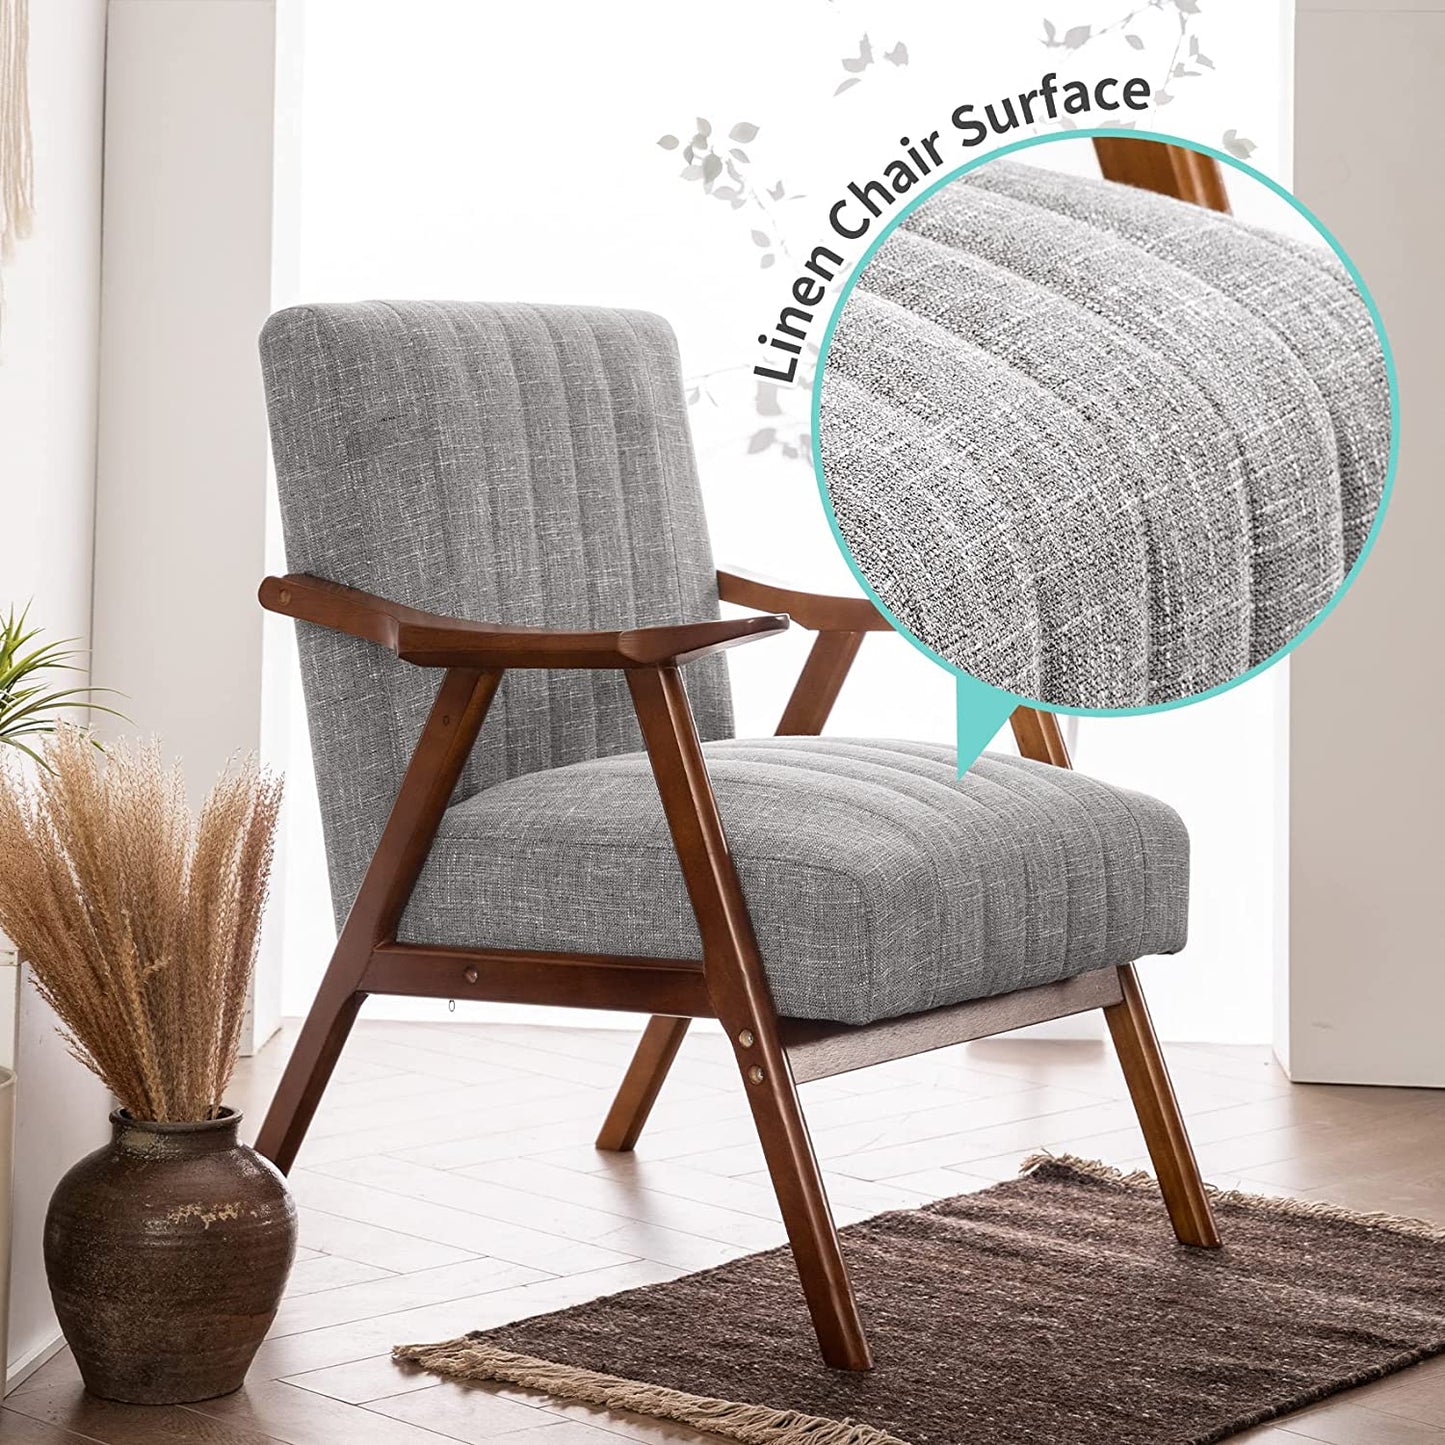 UNICOO - Mid-Century Modern Accent Chair, Fabric Reading Armchair, Easy Assembly, Lounge Chair for Living Room Bedroom (U207)